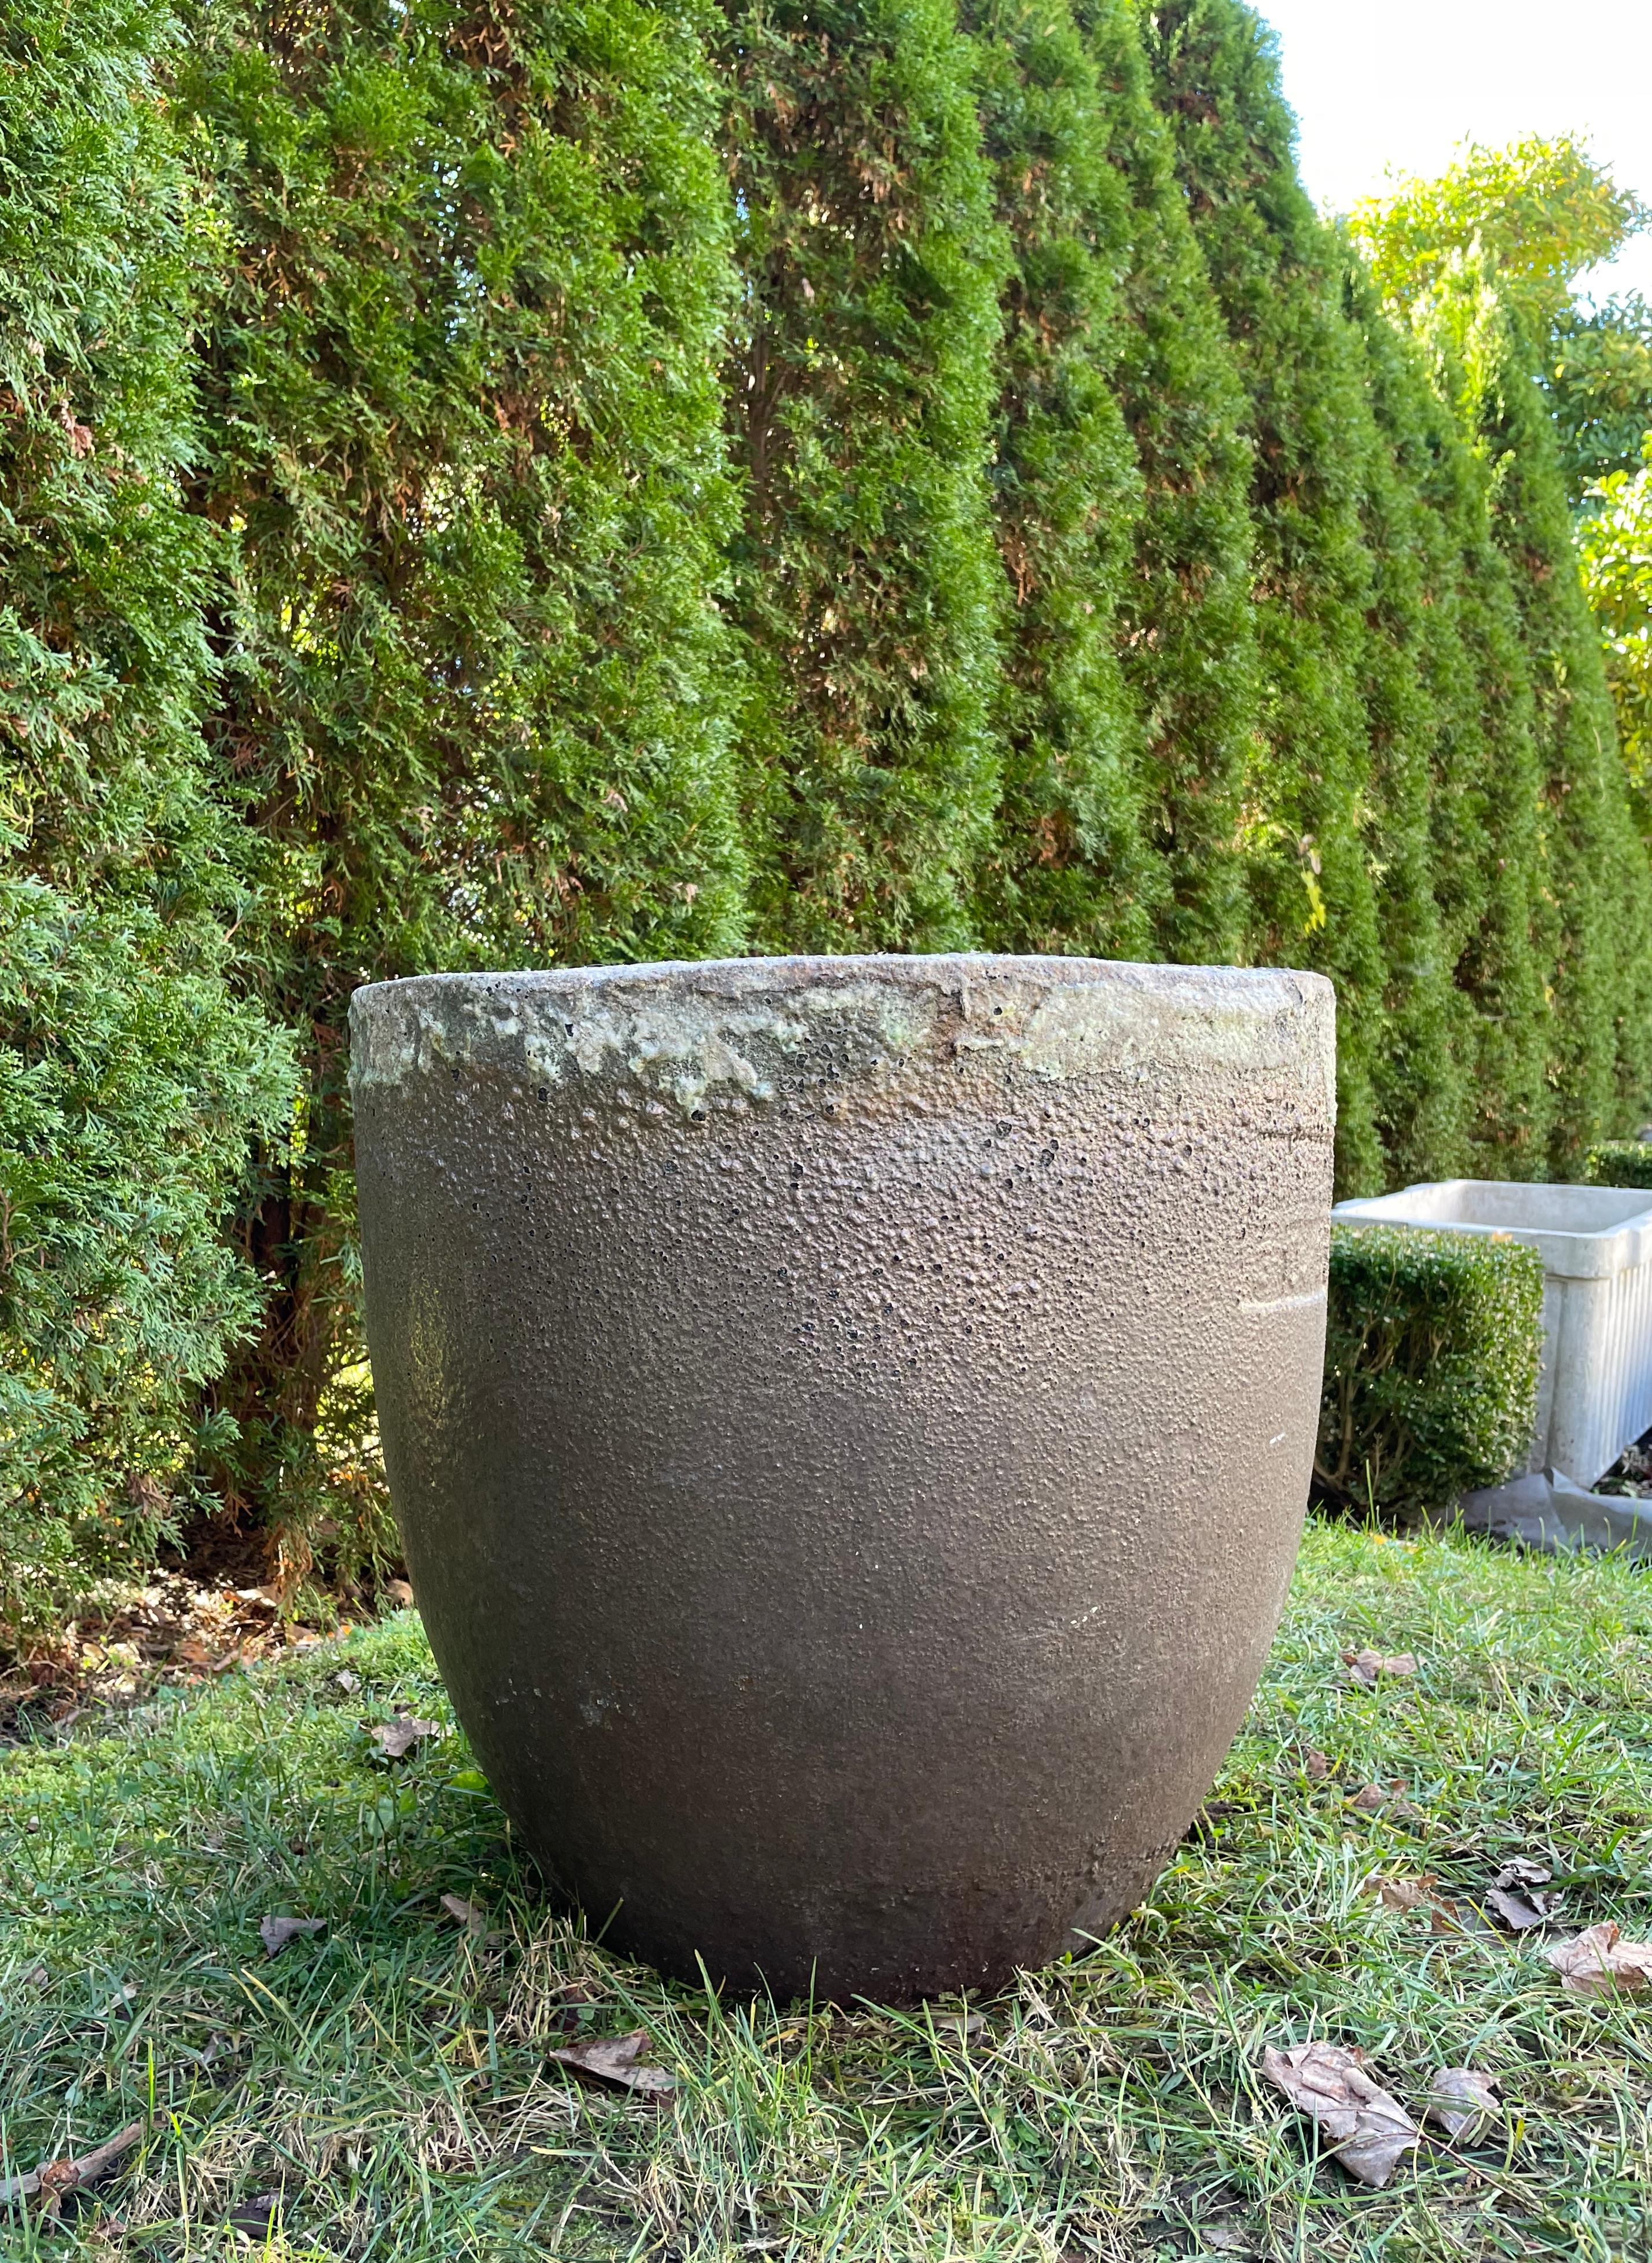 Crucibles have been used through history to smelt metal and other substances, but the ceramic ones make outstanding planters (and fire pits). This one has a dark mottled coppery-colored hue with a subtle sheen to the surface and a commodious